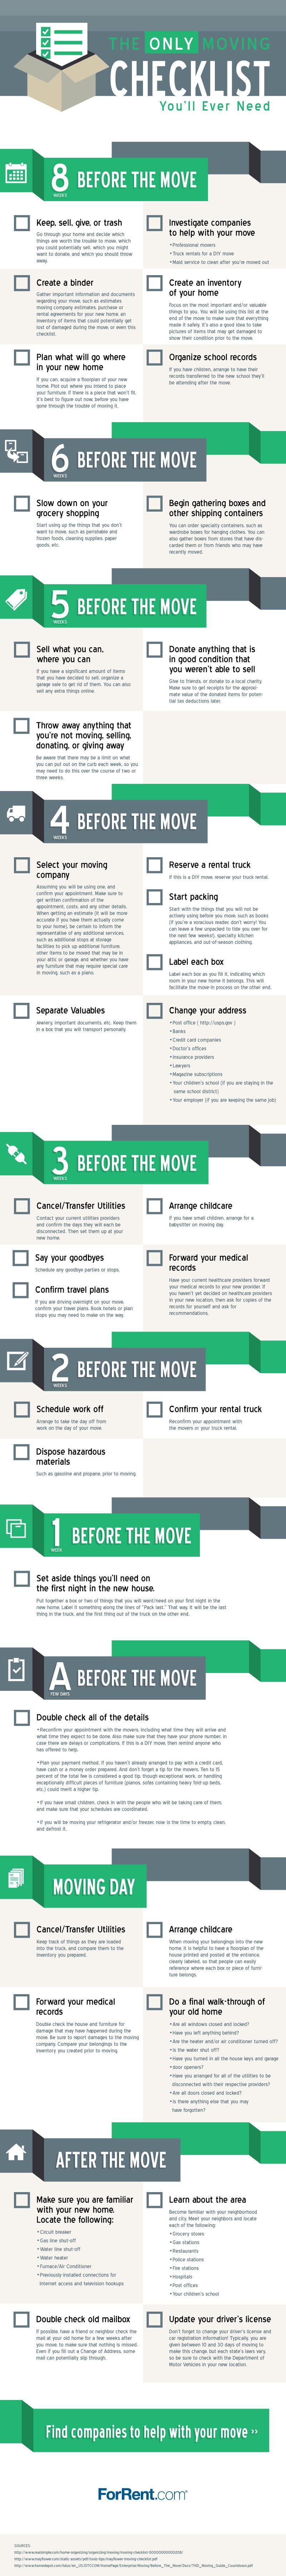 Theres no denying it, moving is a huge hassle. Help yourself out, make the move a lot easier with this simple but robust, moving